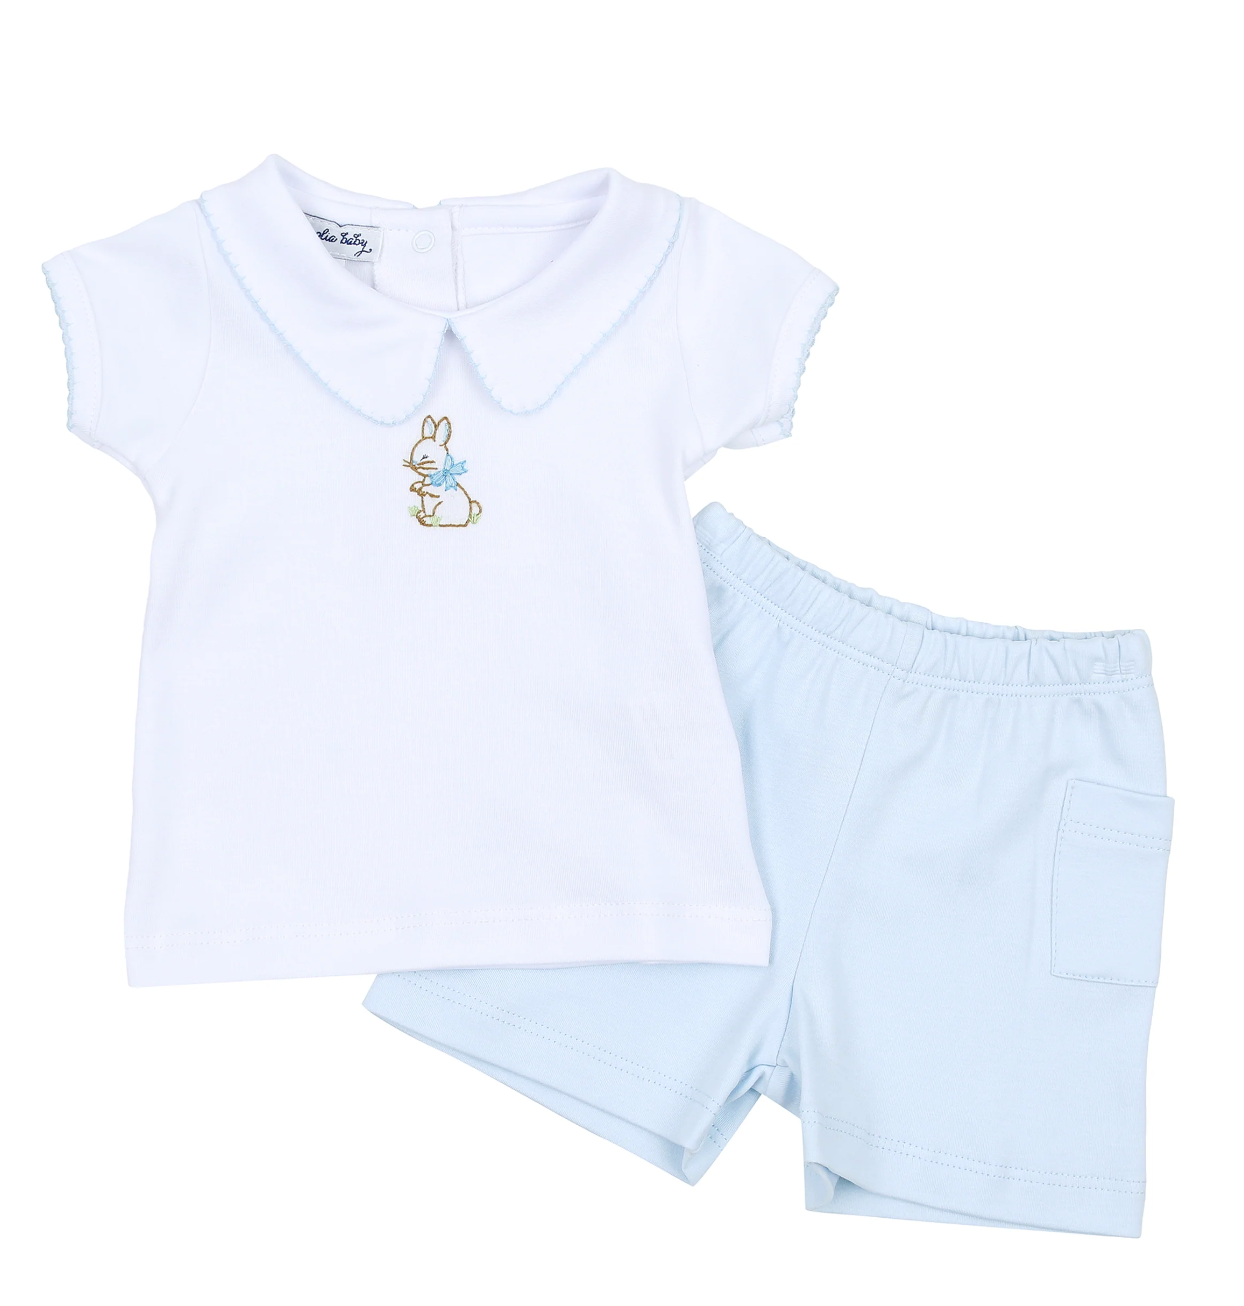 Vintage bunny white top with rabbit embroidery blue shorts by magnolia baby in pima cotton